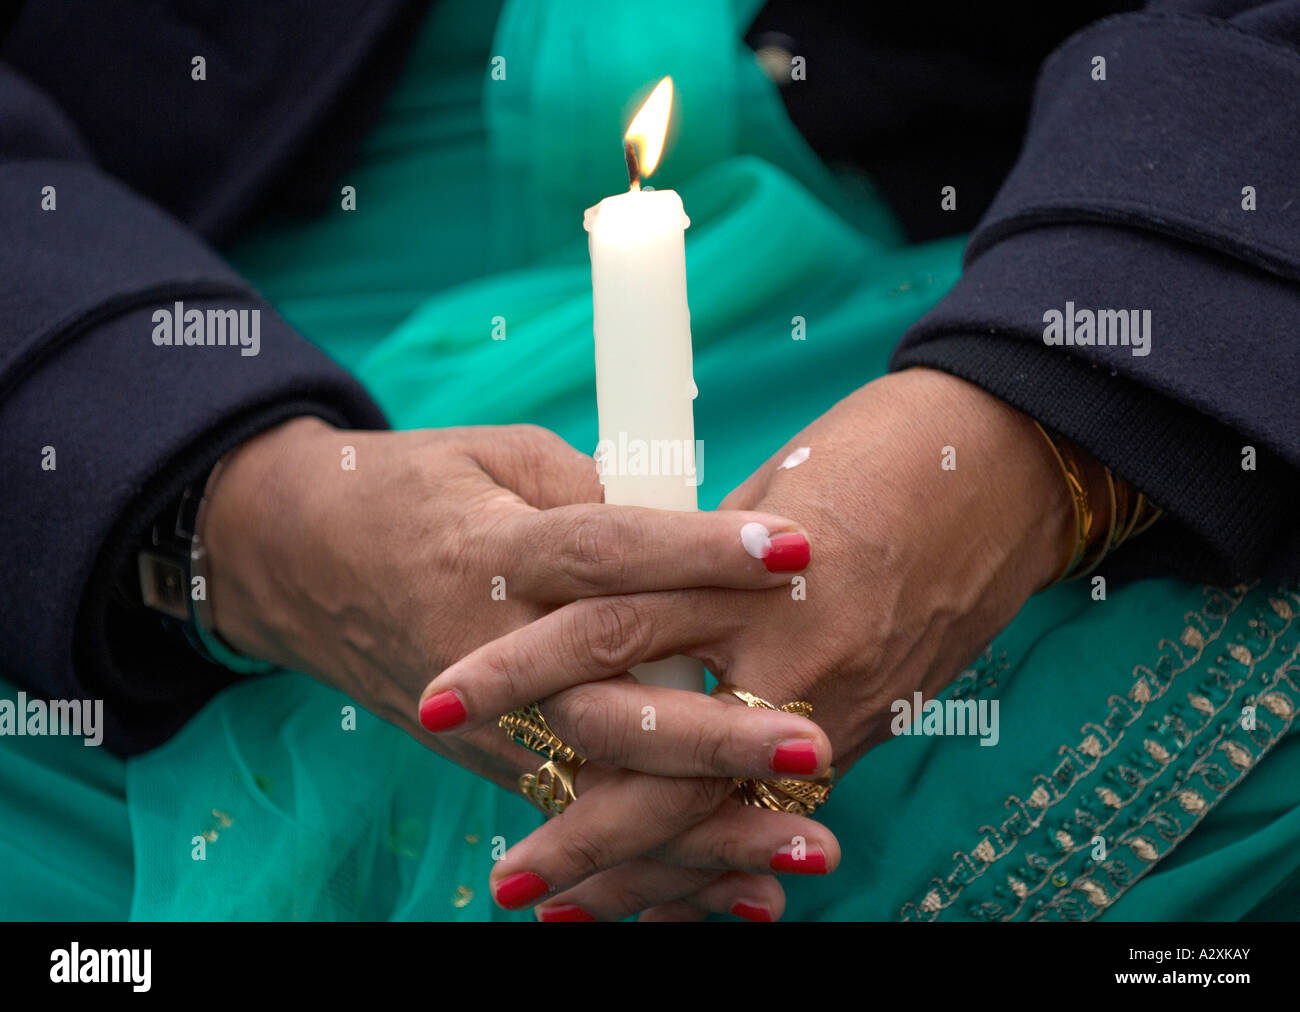 Sikh woman holding a lit candle Stock Photo